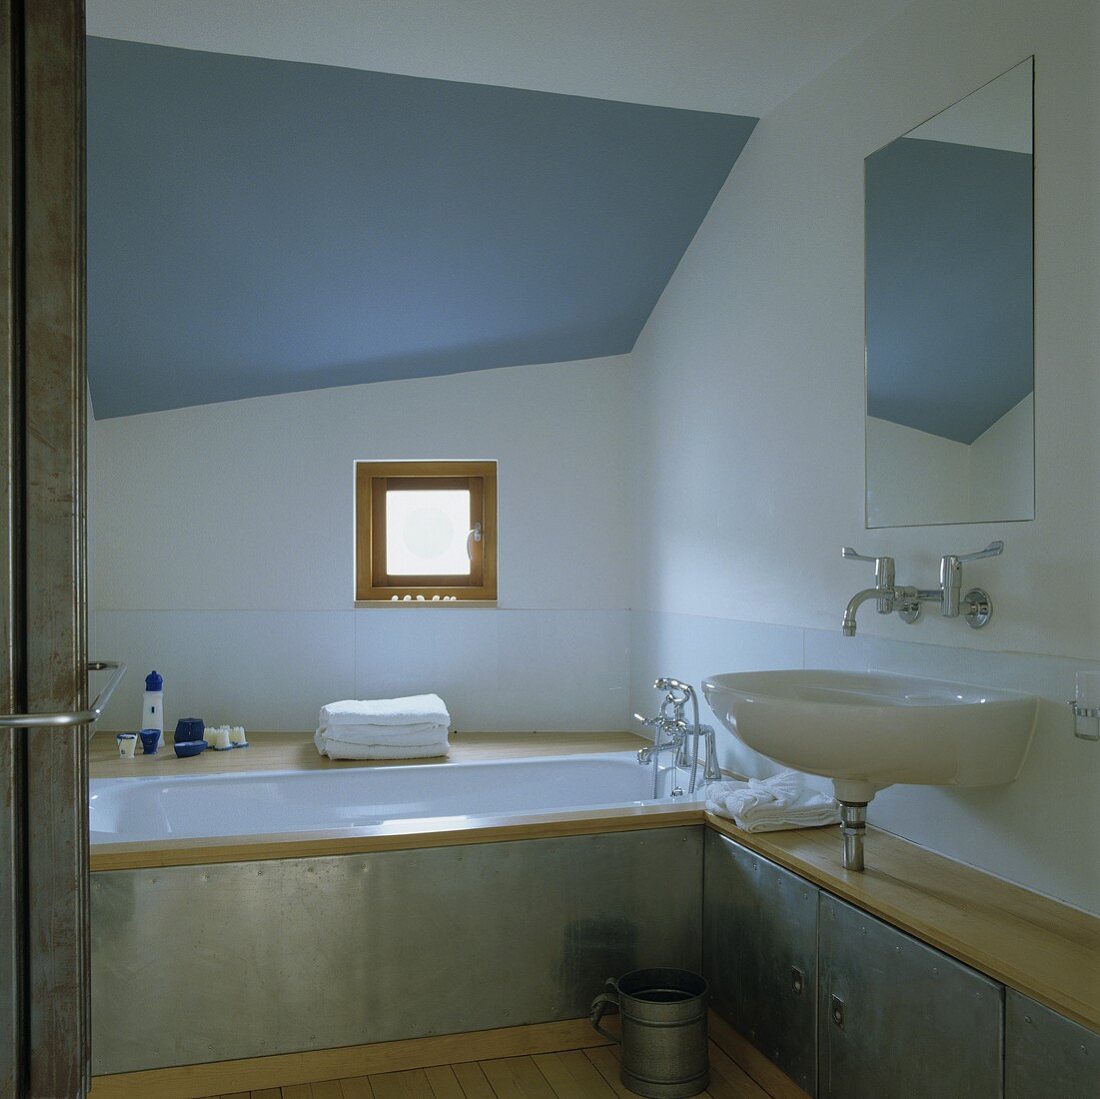 An attic bathroom with a blue ceiling - a wash basin and a built-in bathroom with circumferential metal cladding